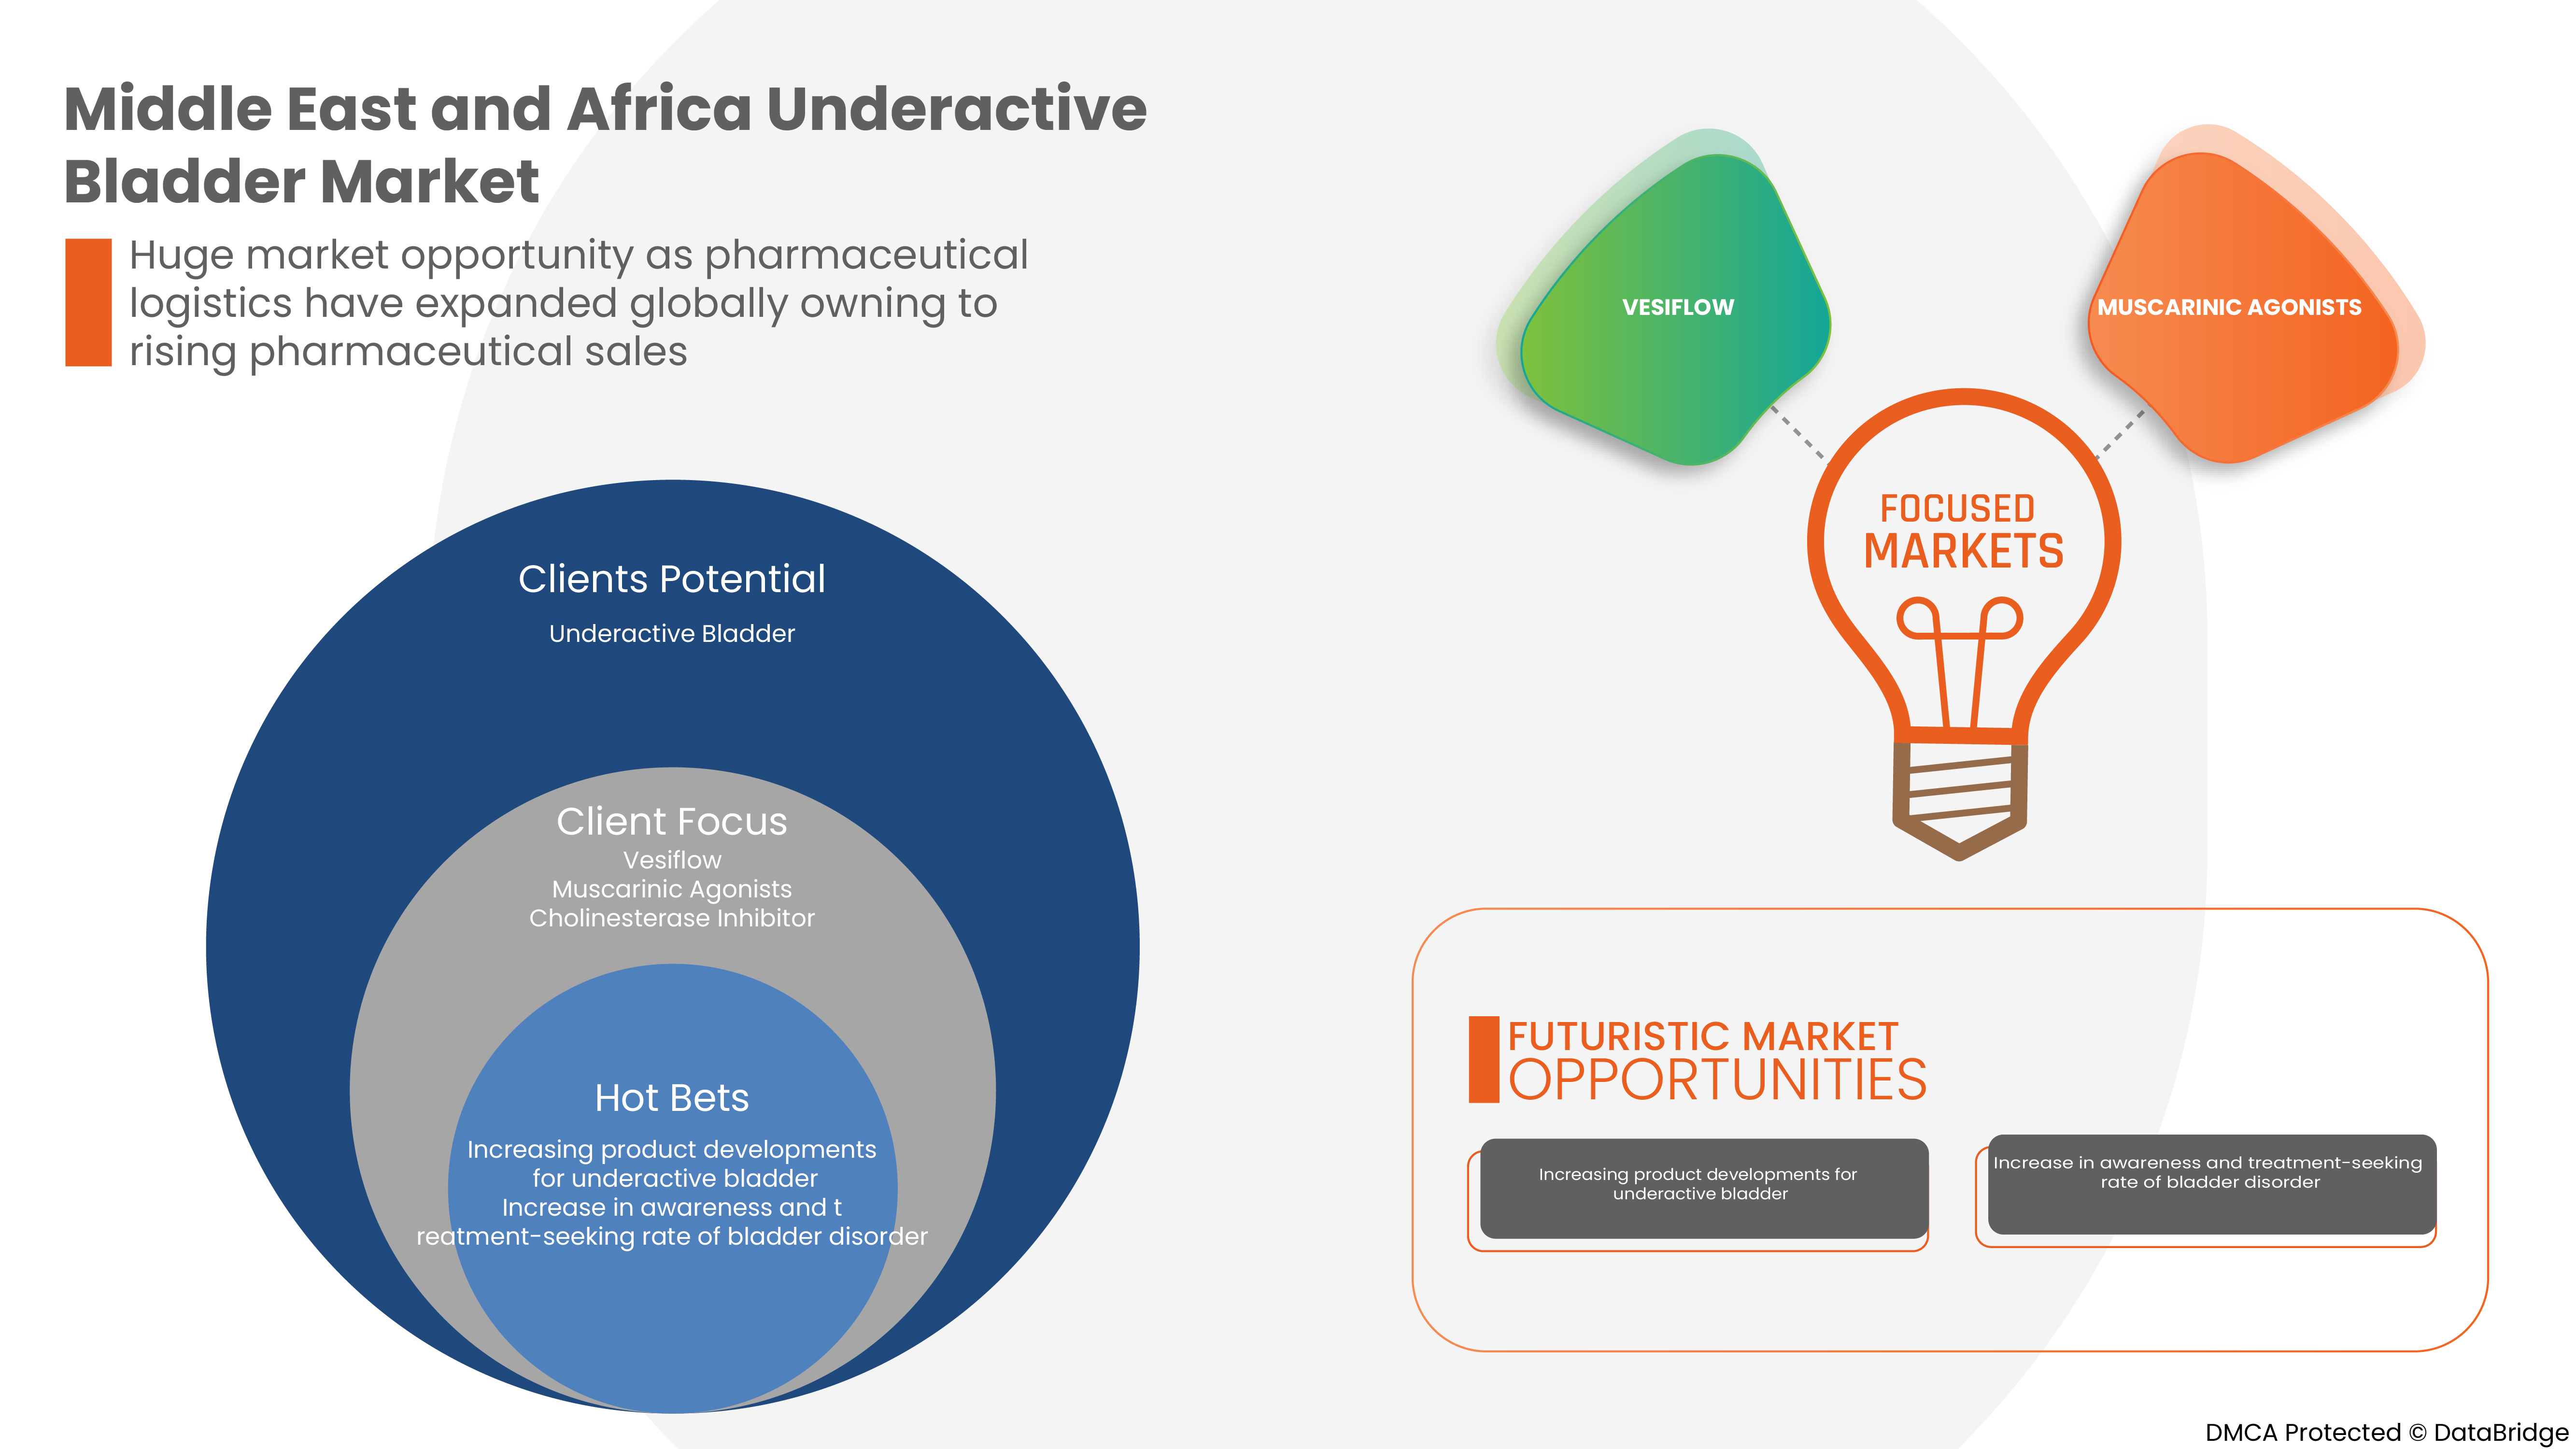 Middle East and Africa Underactive Bladder Market